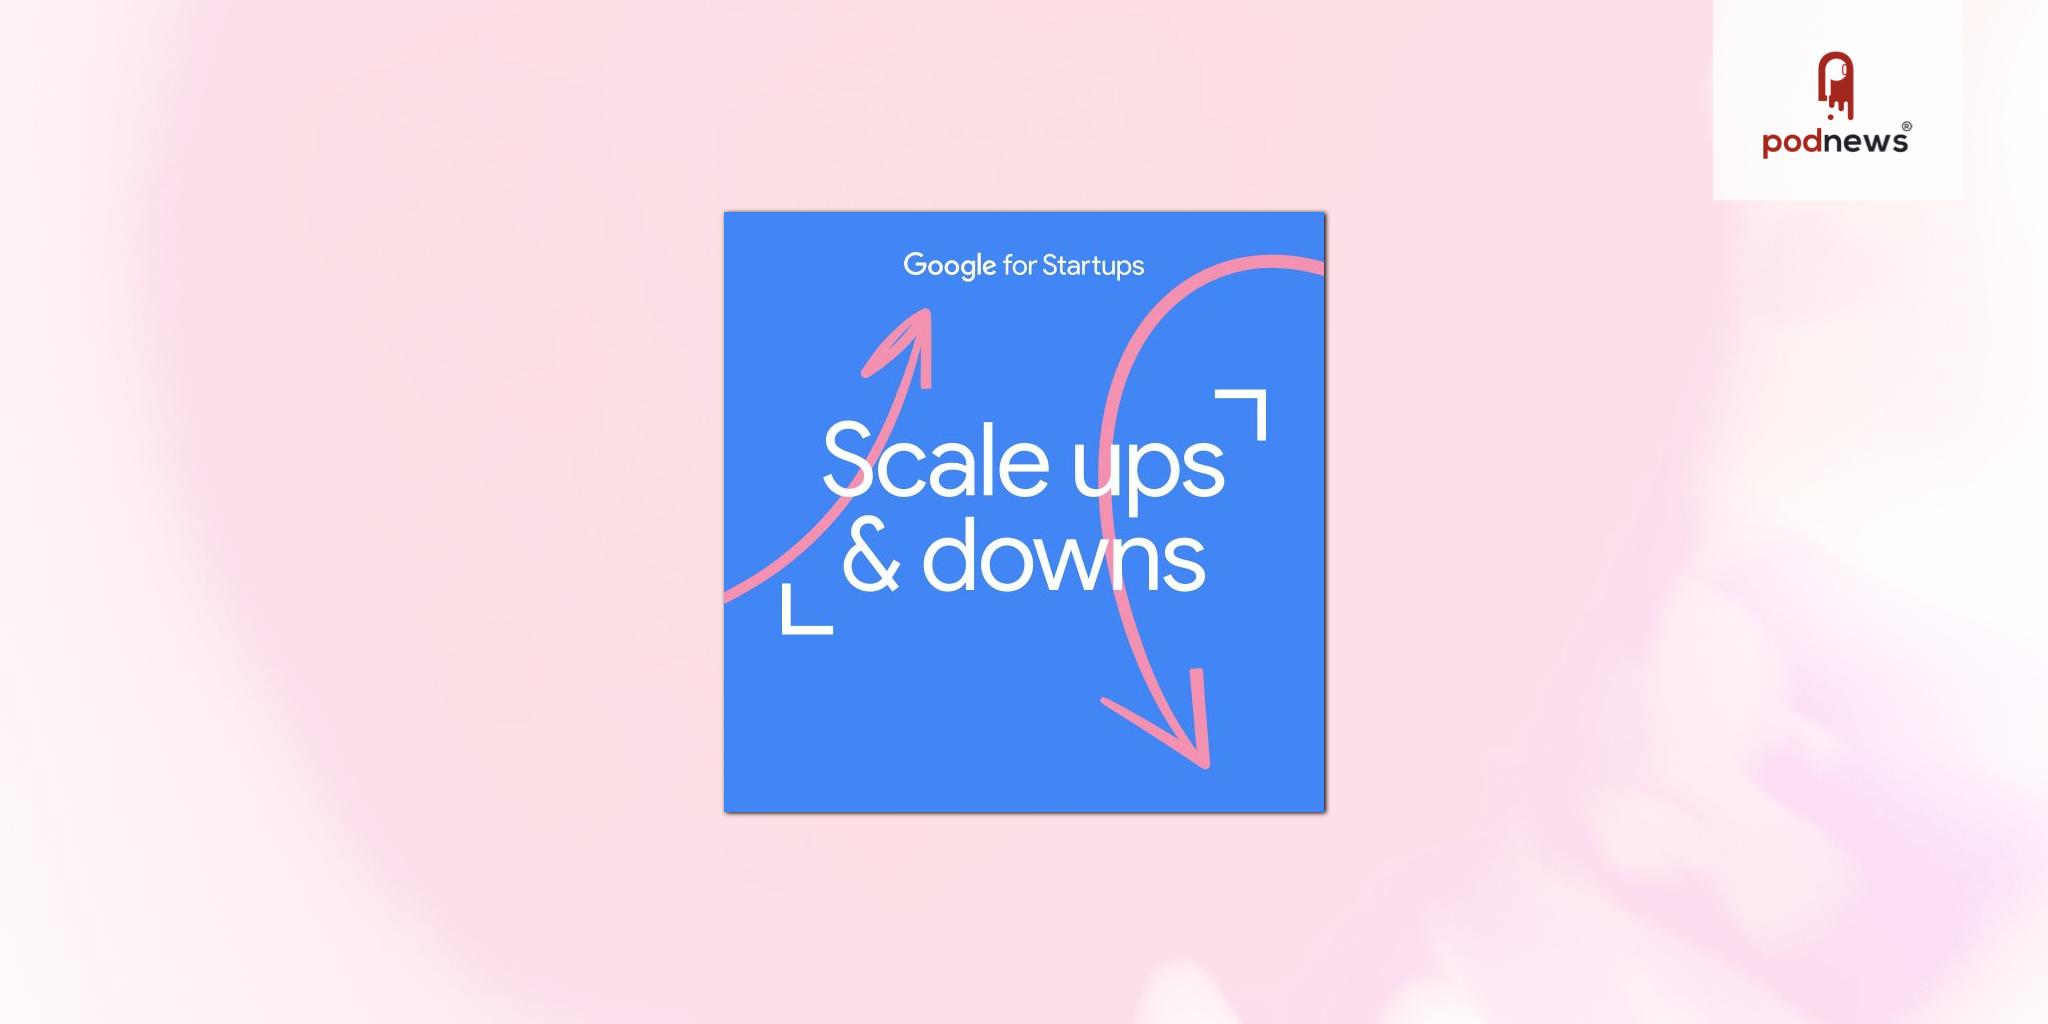 Scale Ups And Downs by Google for Startups UK launches